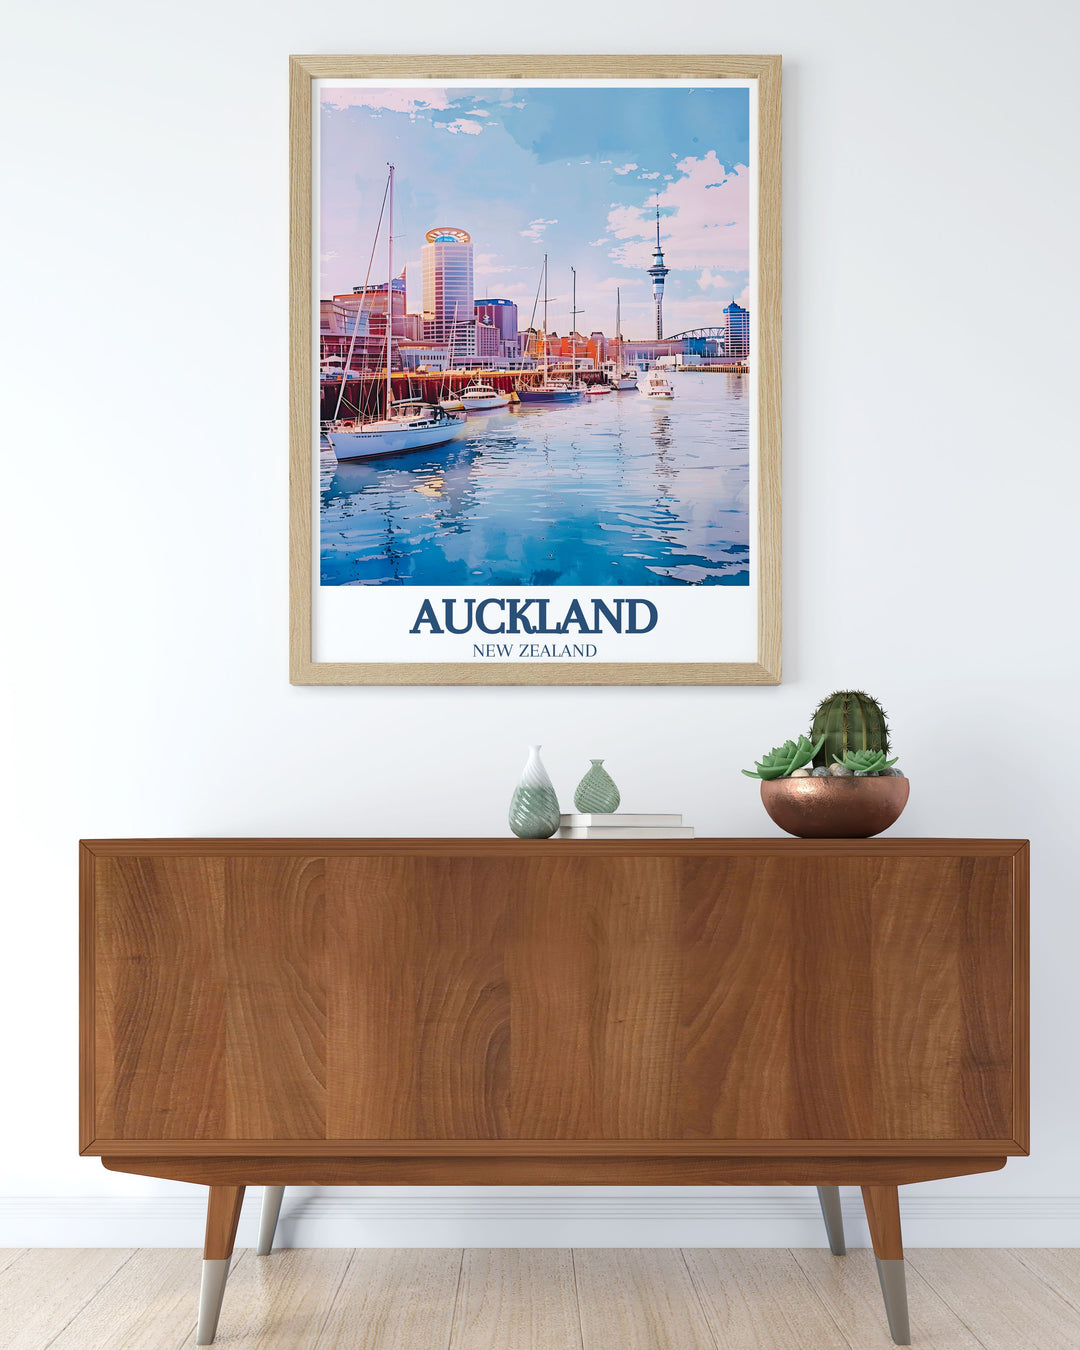 High quality New Zealand poster of the Auckland Harbour Bridge, capturing this iconic landmarks majestic structure and panoramic views. Perfect for architectural art lovers and adding a statement piece to your home or office decor.